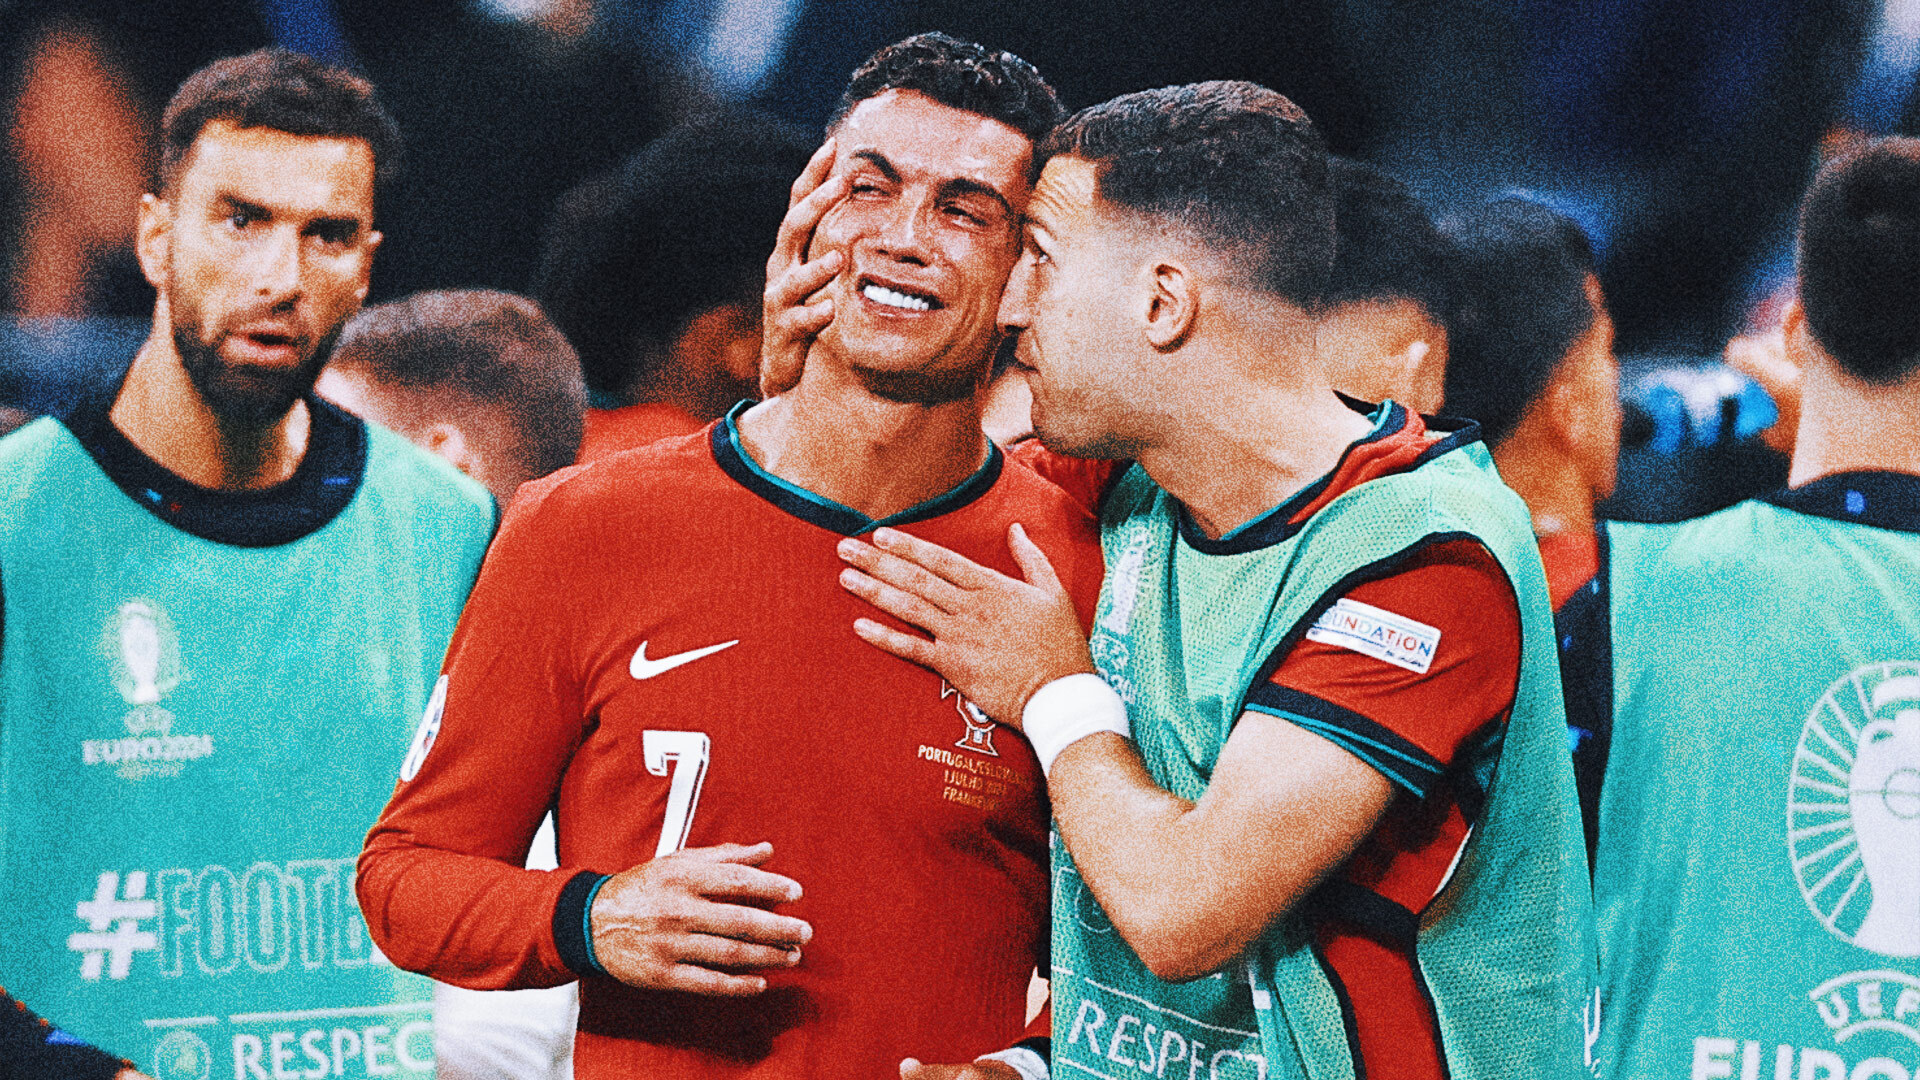 Ronaldo cries after missed penalty, but eventually finds joy as Portugal advances